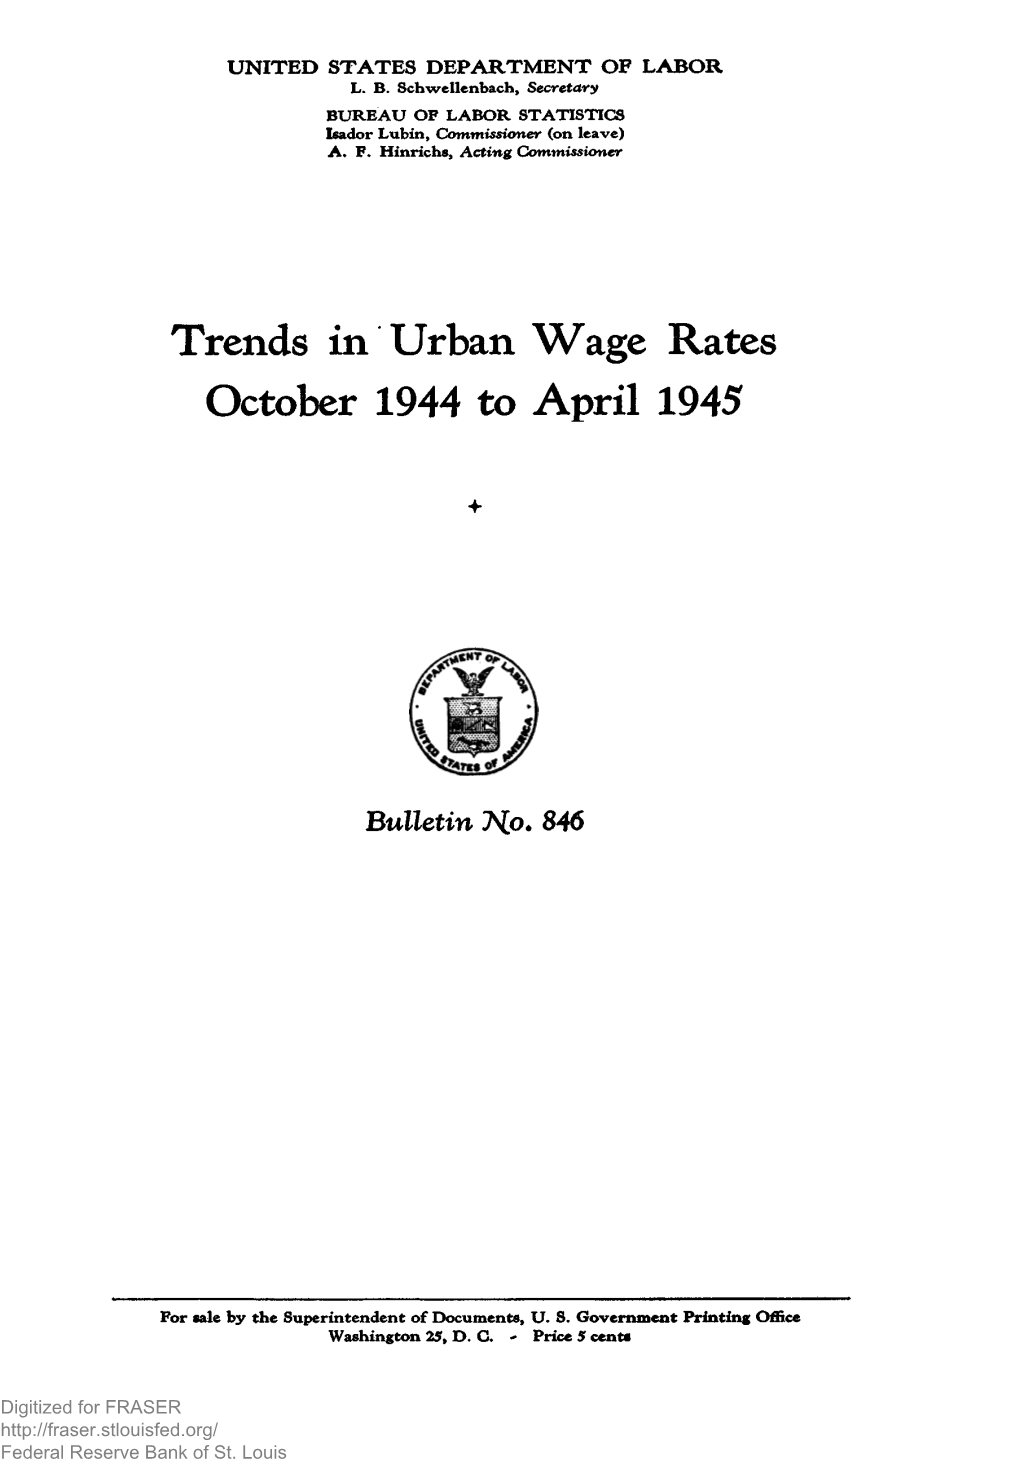 Trends in Urban Wage Rates, October 1944 to April 1945 : Bulletin